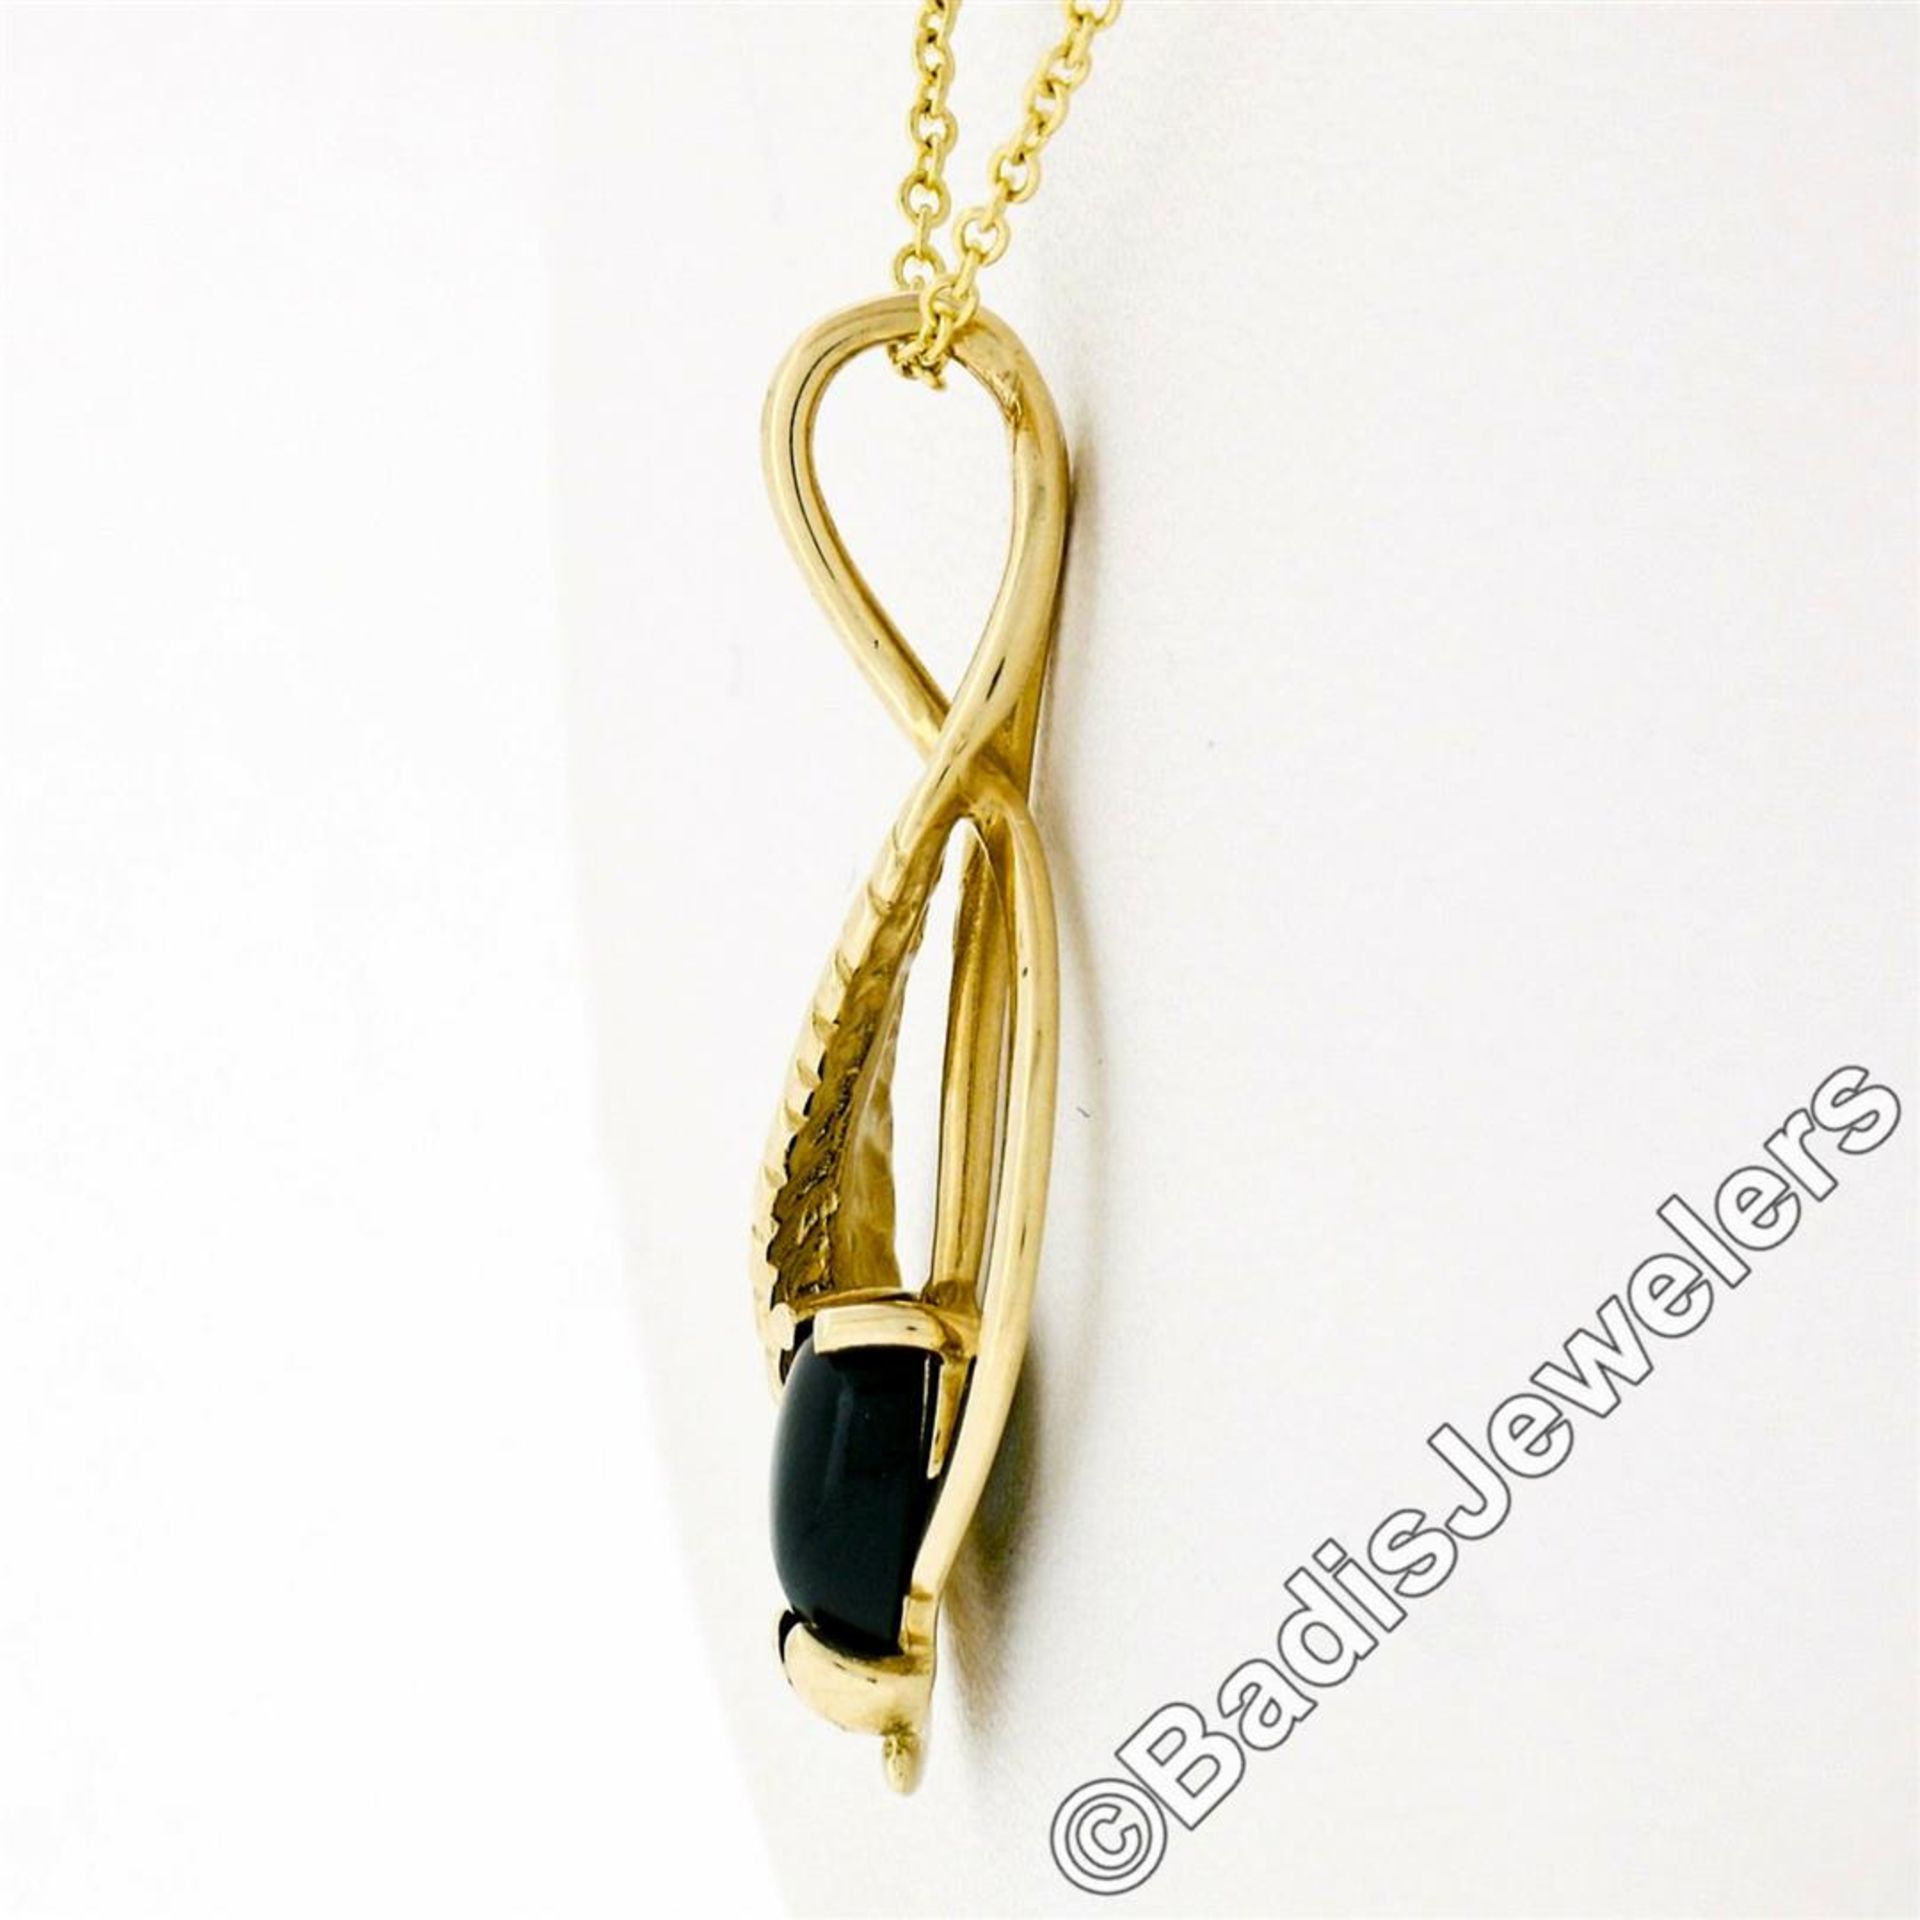 14kt Yellow Gold Pear Cabochon Black Onyx Open Pendant Necklace - Image 4 of 7